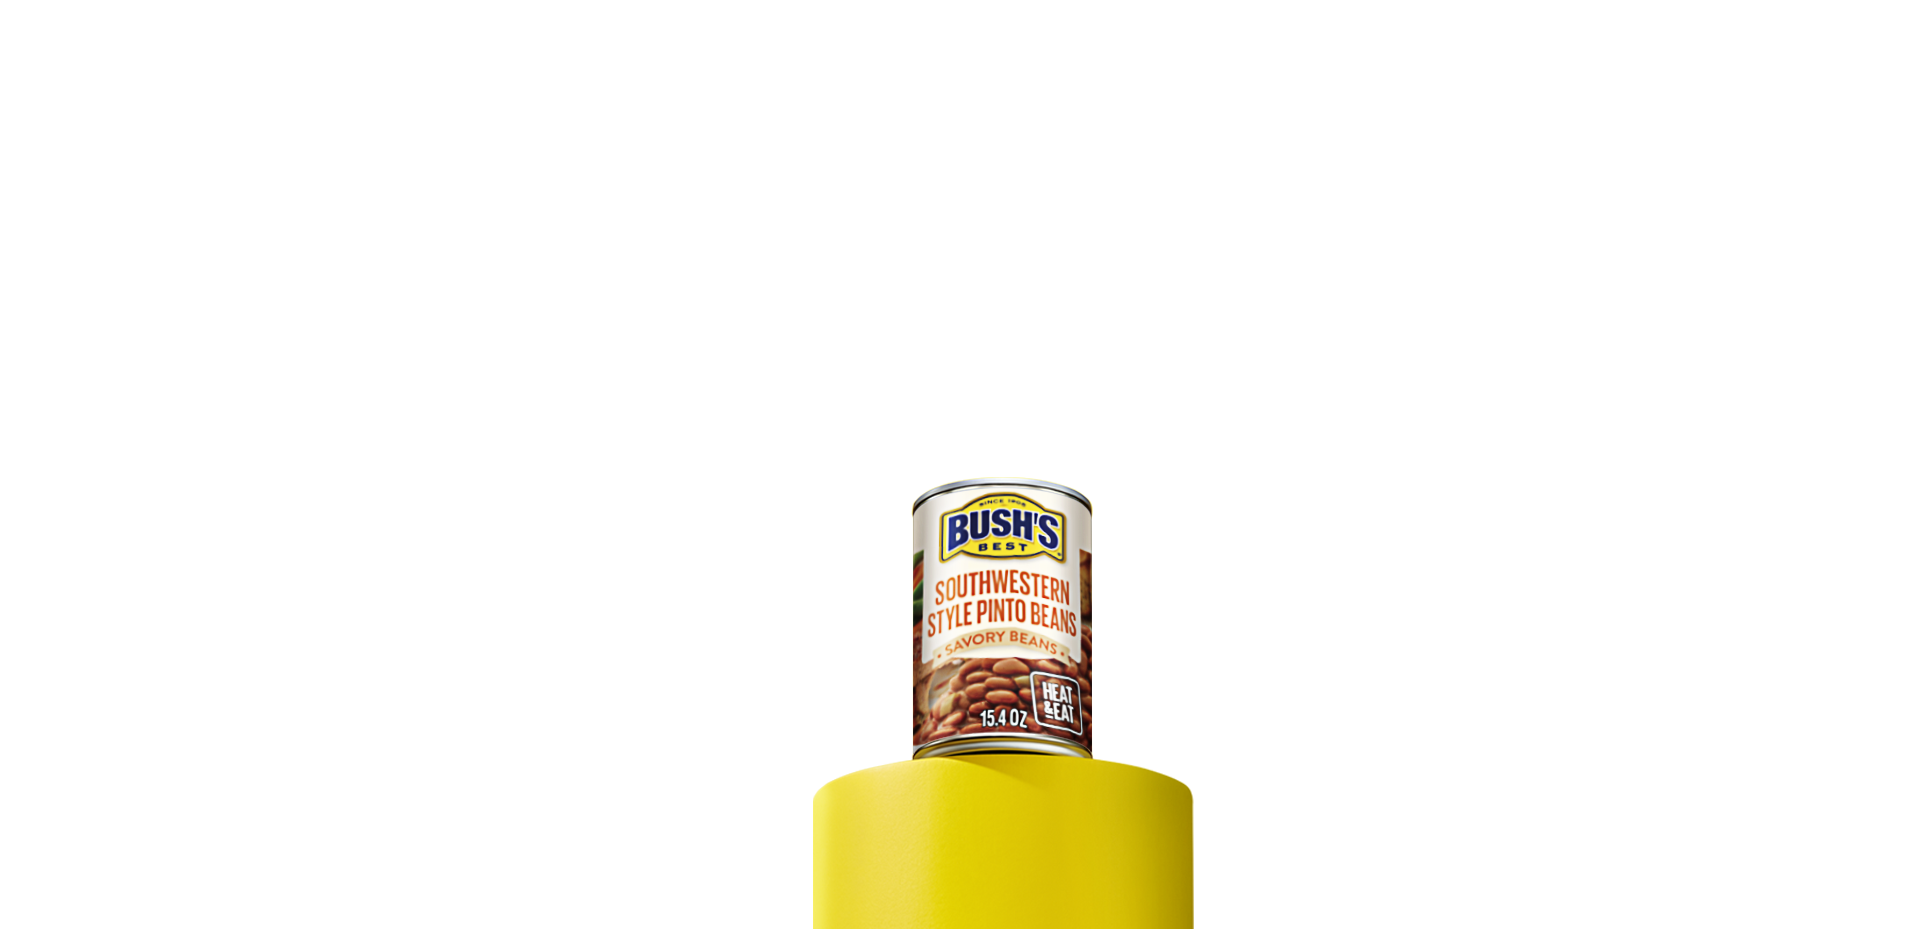 A can of Bush’s Best Savory Beans Southwestern Style Pinto beans sitting on a yellow column